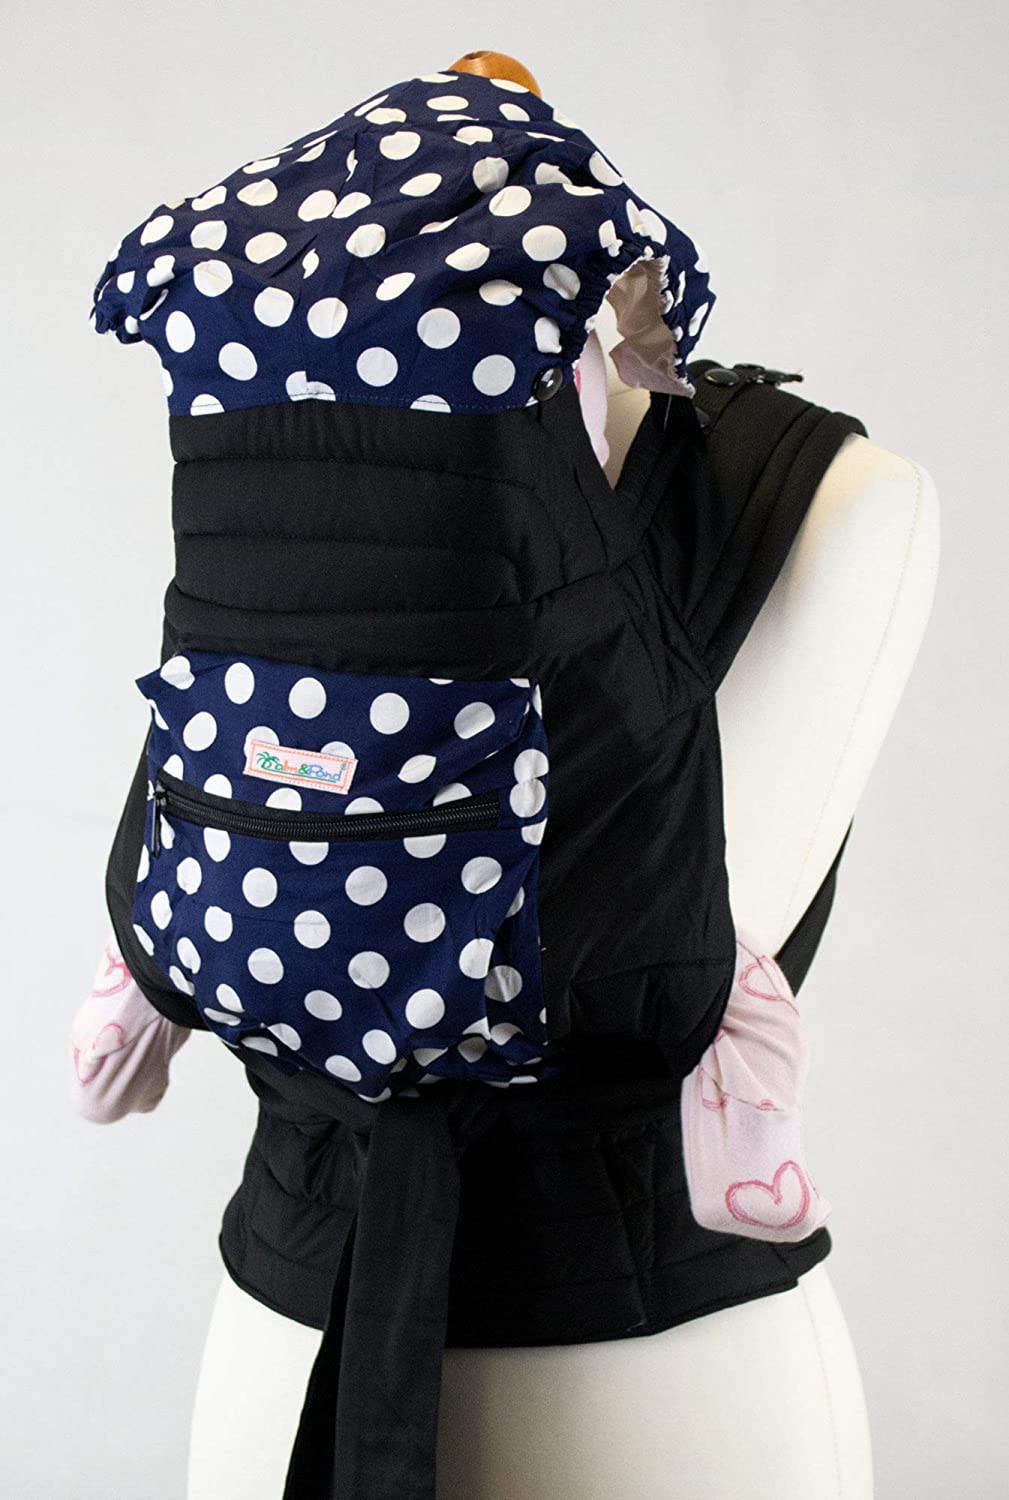 Palm and Pond Mei Tai Baby Carrier with Hood and Pocket – Blue/White Polka Dots